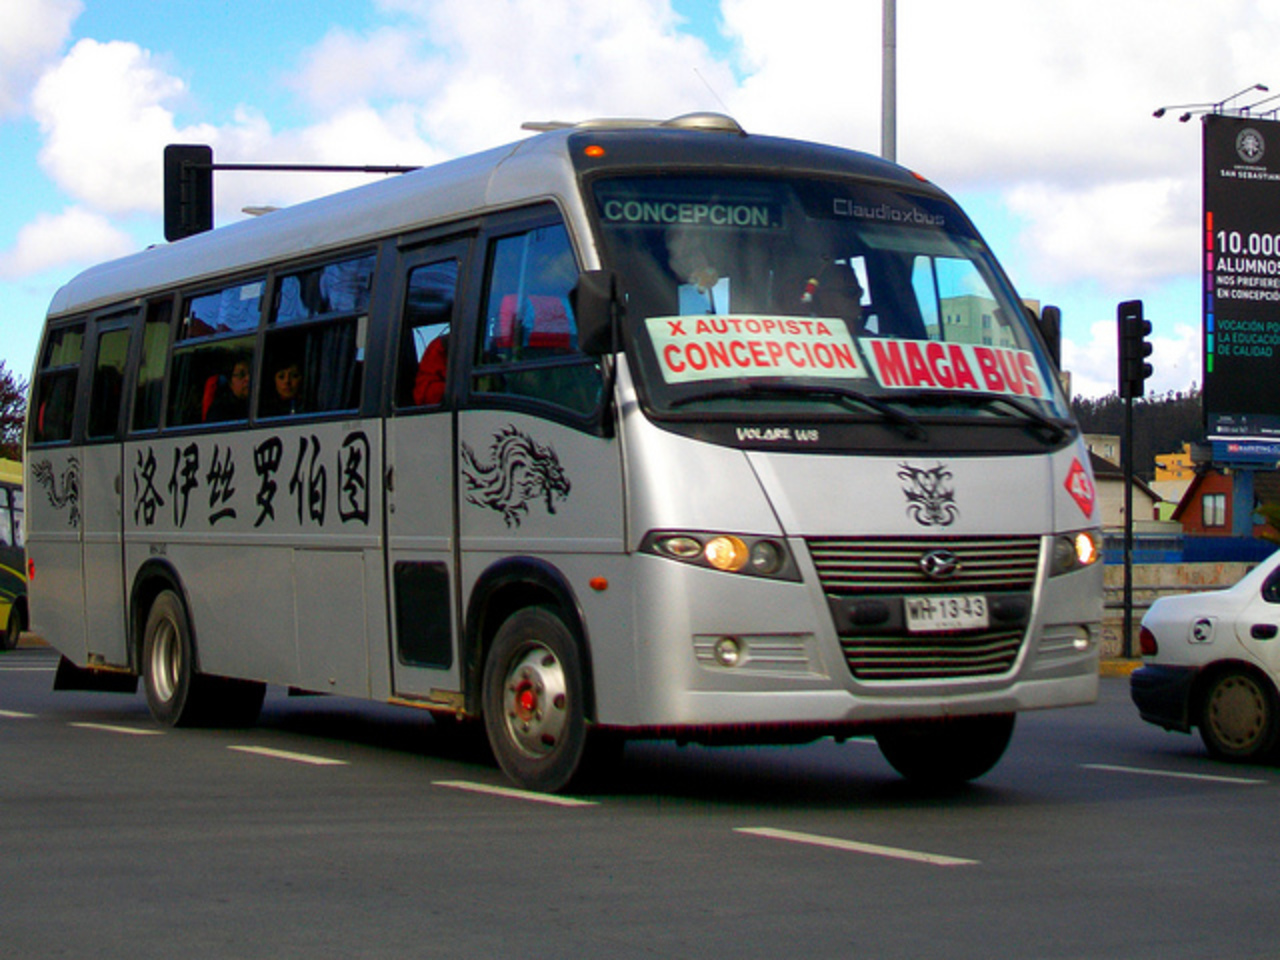 Marcopolo Volare W8 /// Maga Bus. | Flickr - Photo Sharing!